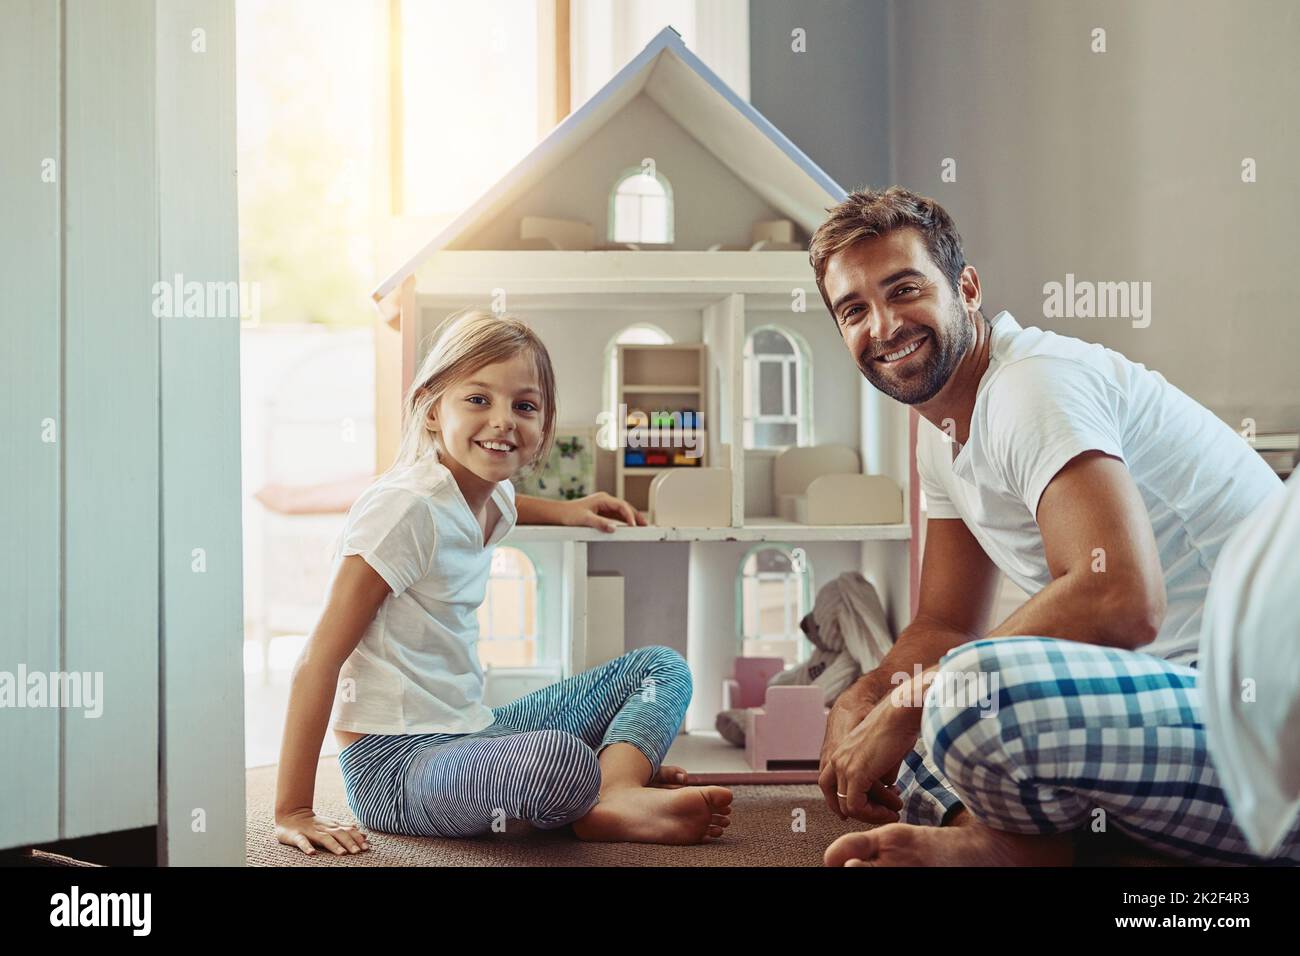 Take any opportunity to bond with them. Shot of an adorable little girl spending time with her father at home. Stock Photo